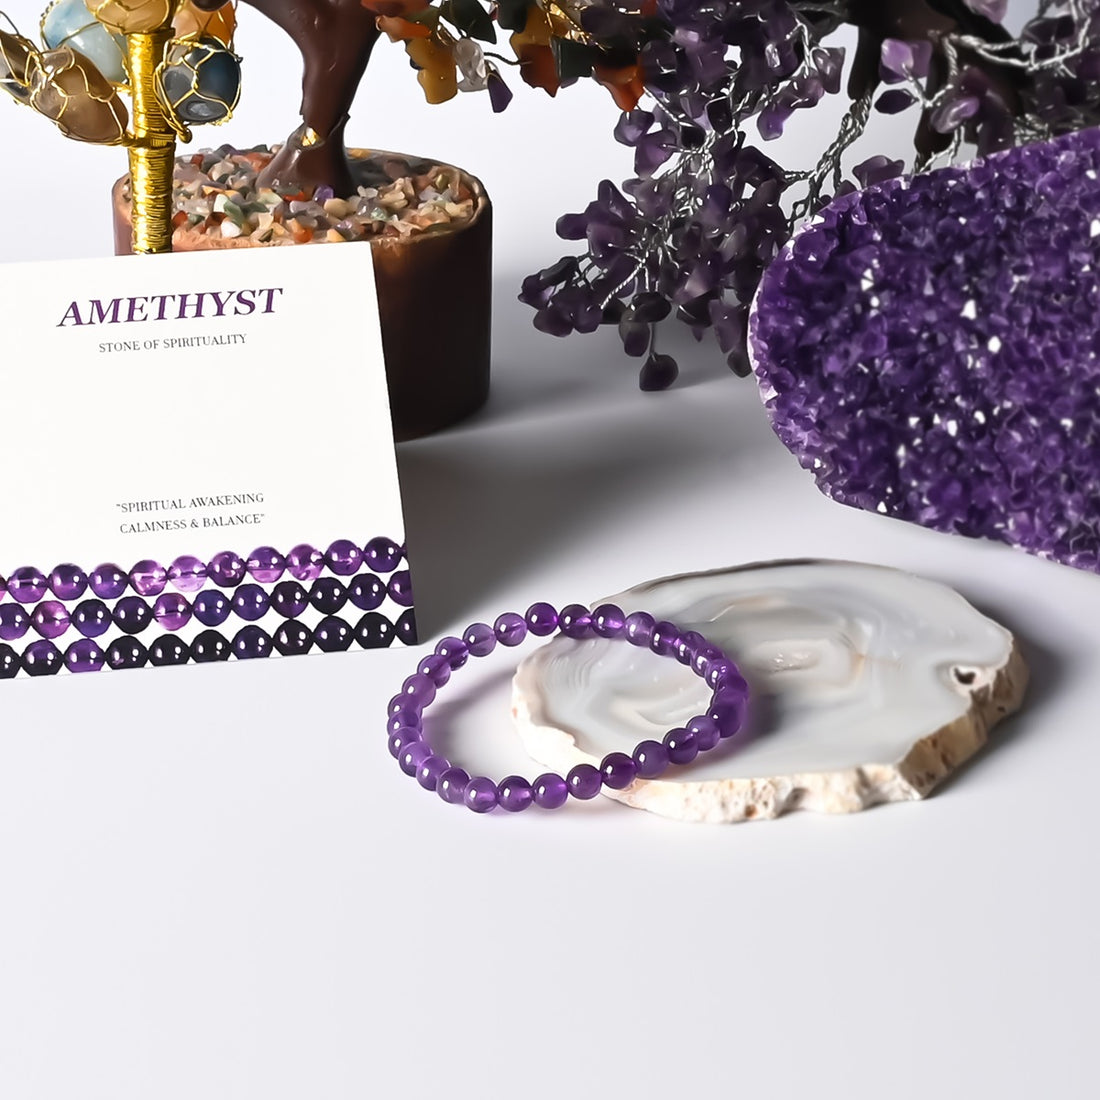 Visual representation of spiritual awakening associated with the Amethyst Stretch Bracelet, radiating positive energy and enlightenment